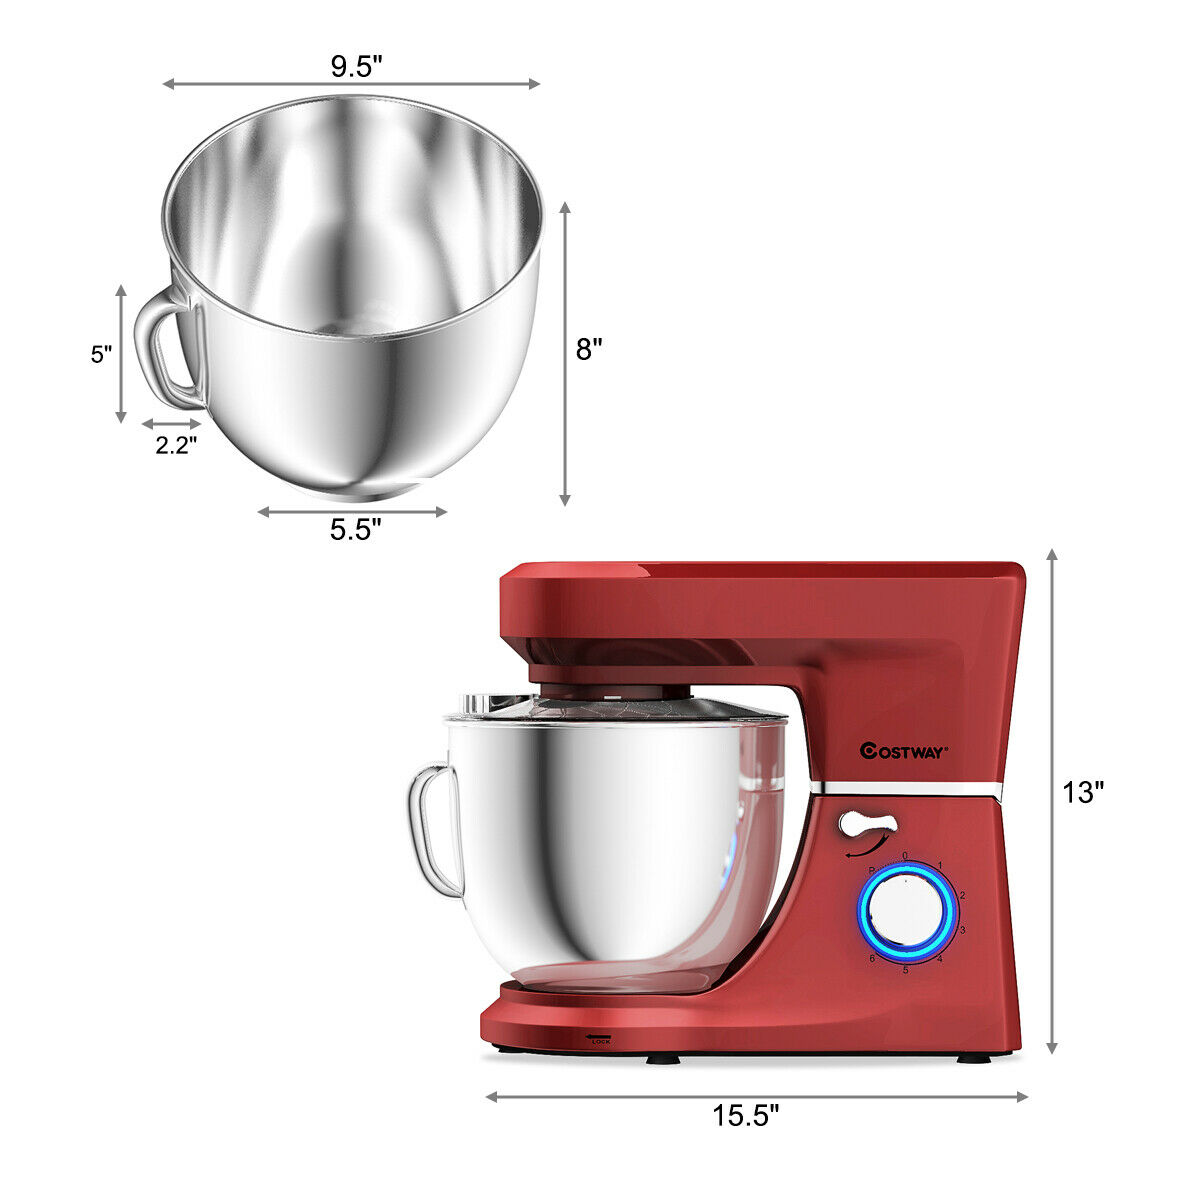 Costway Tilt-Head Stand Mixer 7.5 Qt 6 Speed 660W with Dough Hook, Whisk & Beater Red - image 2 of 10